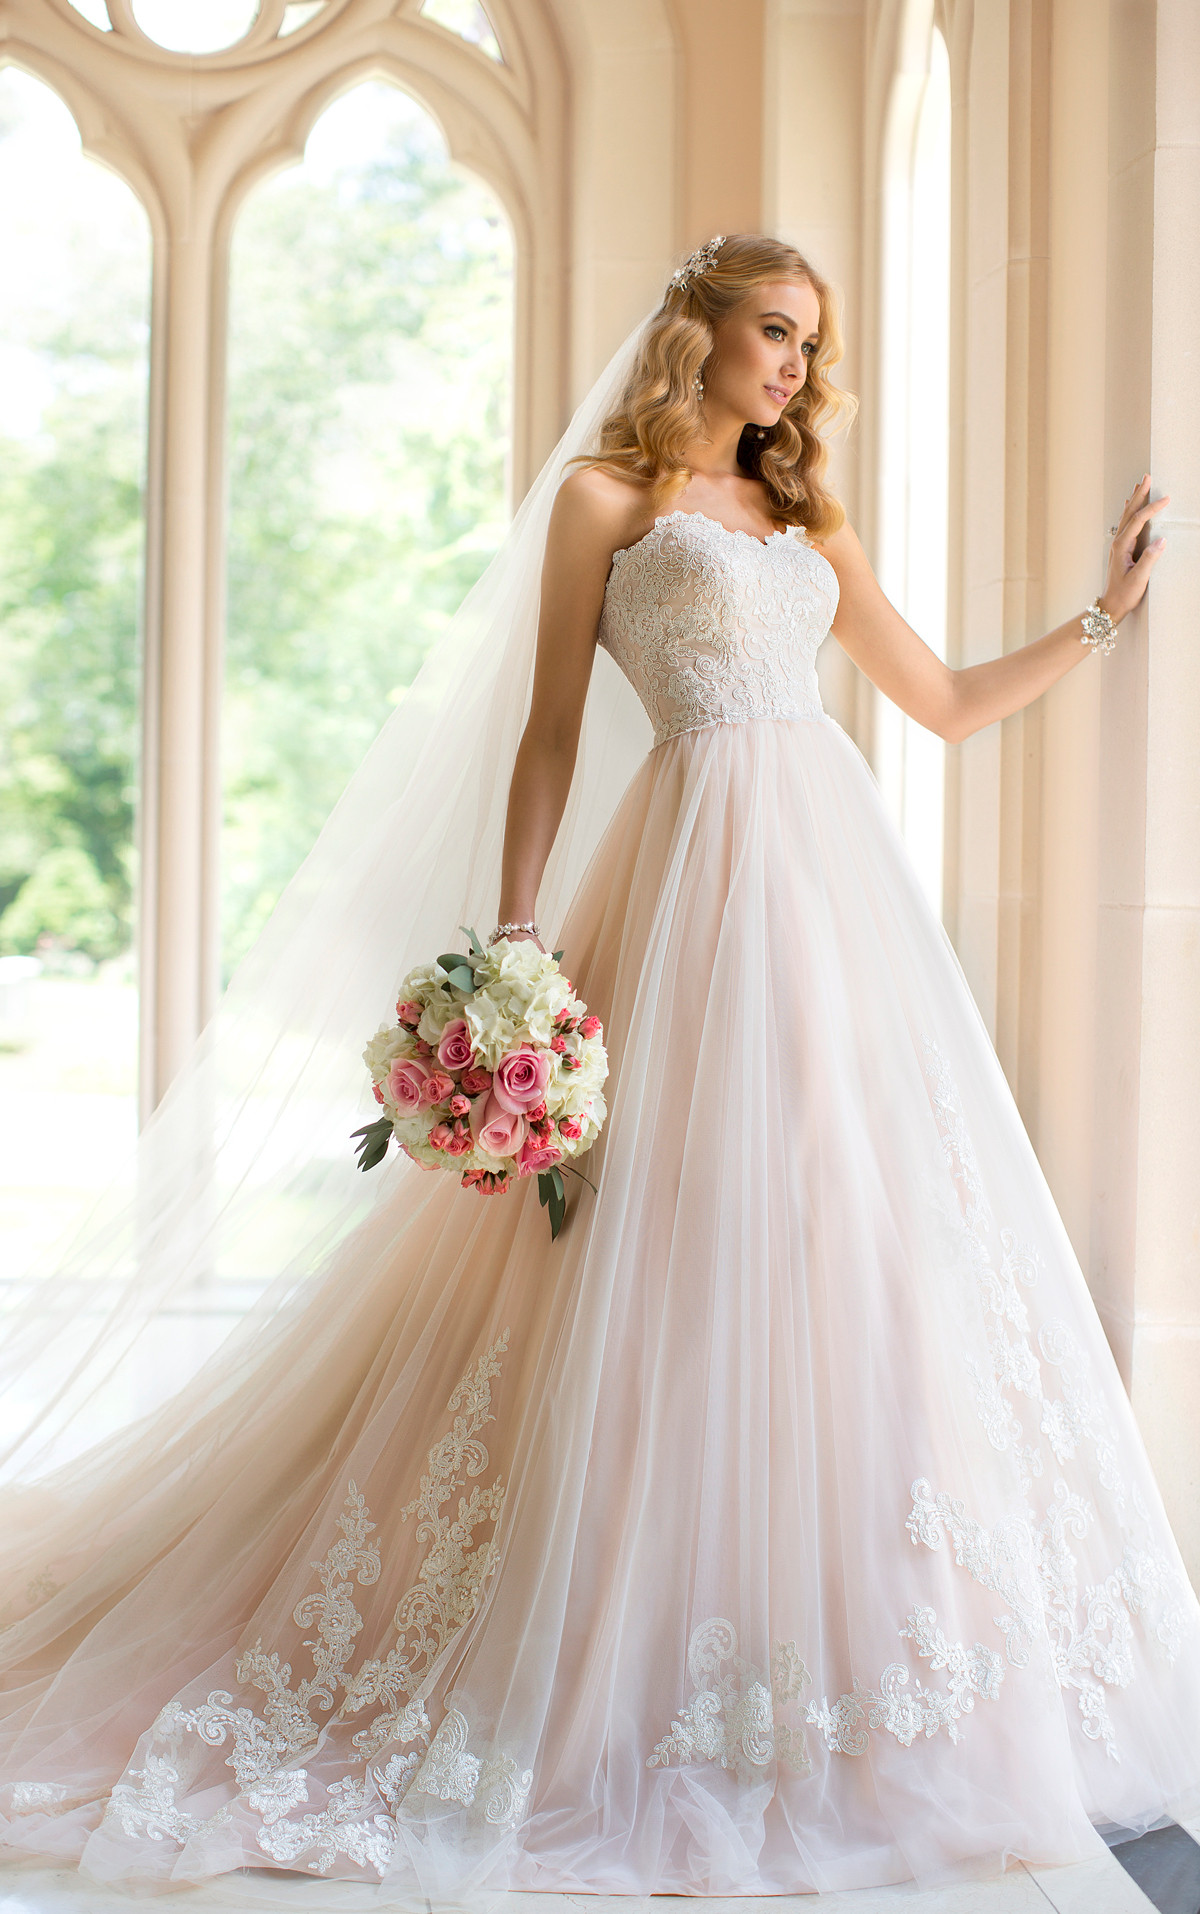 Best Wedding Dress Designers
 The Best Gowns from The Most In Demand Wedding Dress